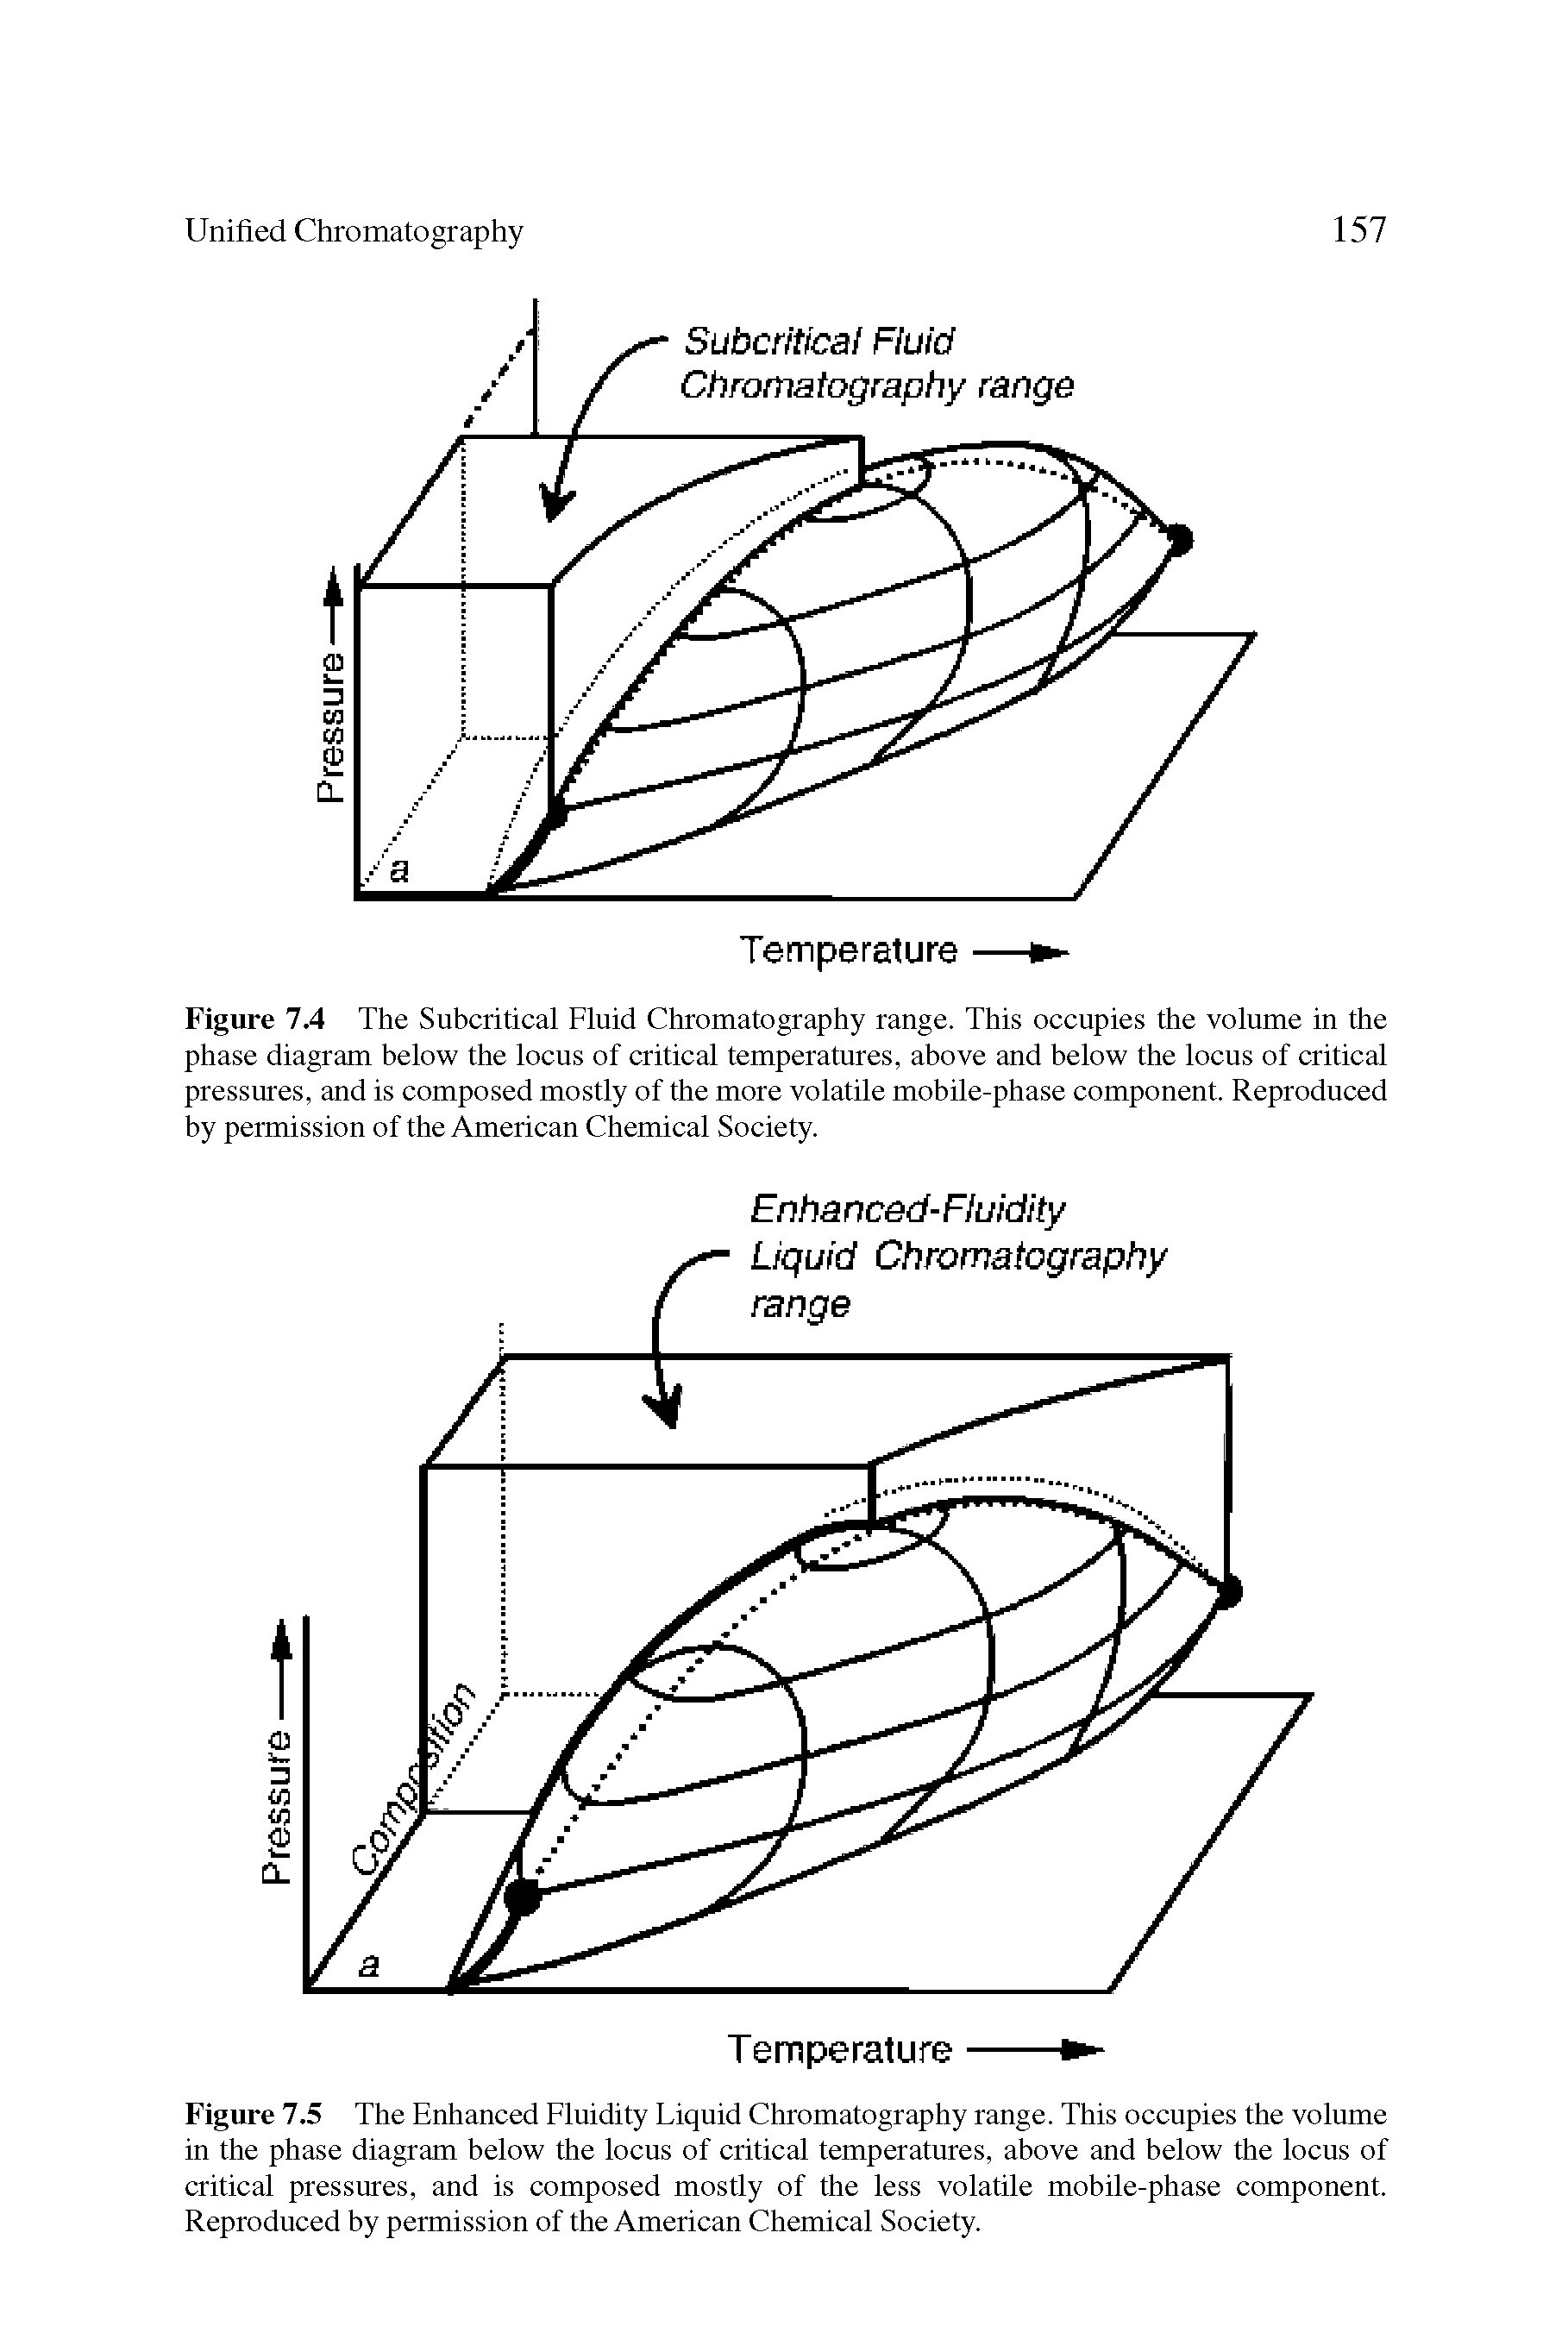 Figure 7.4 The Subcritical Fluid Chromatography range. This occupies the volume in the phase diagram below the locus of critical temperatures, above and below the locus of critical pressures, and is composed mostly of the more volatile mobile-phase component. Reproduced by permission of the American Chemical Society.